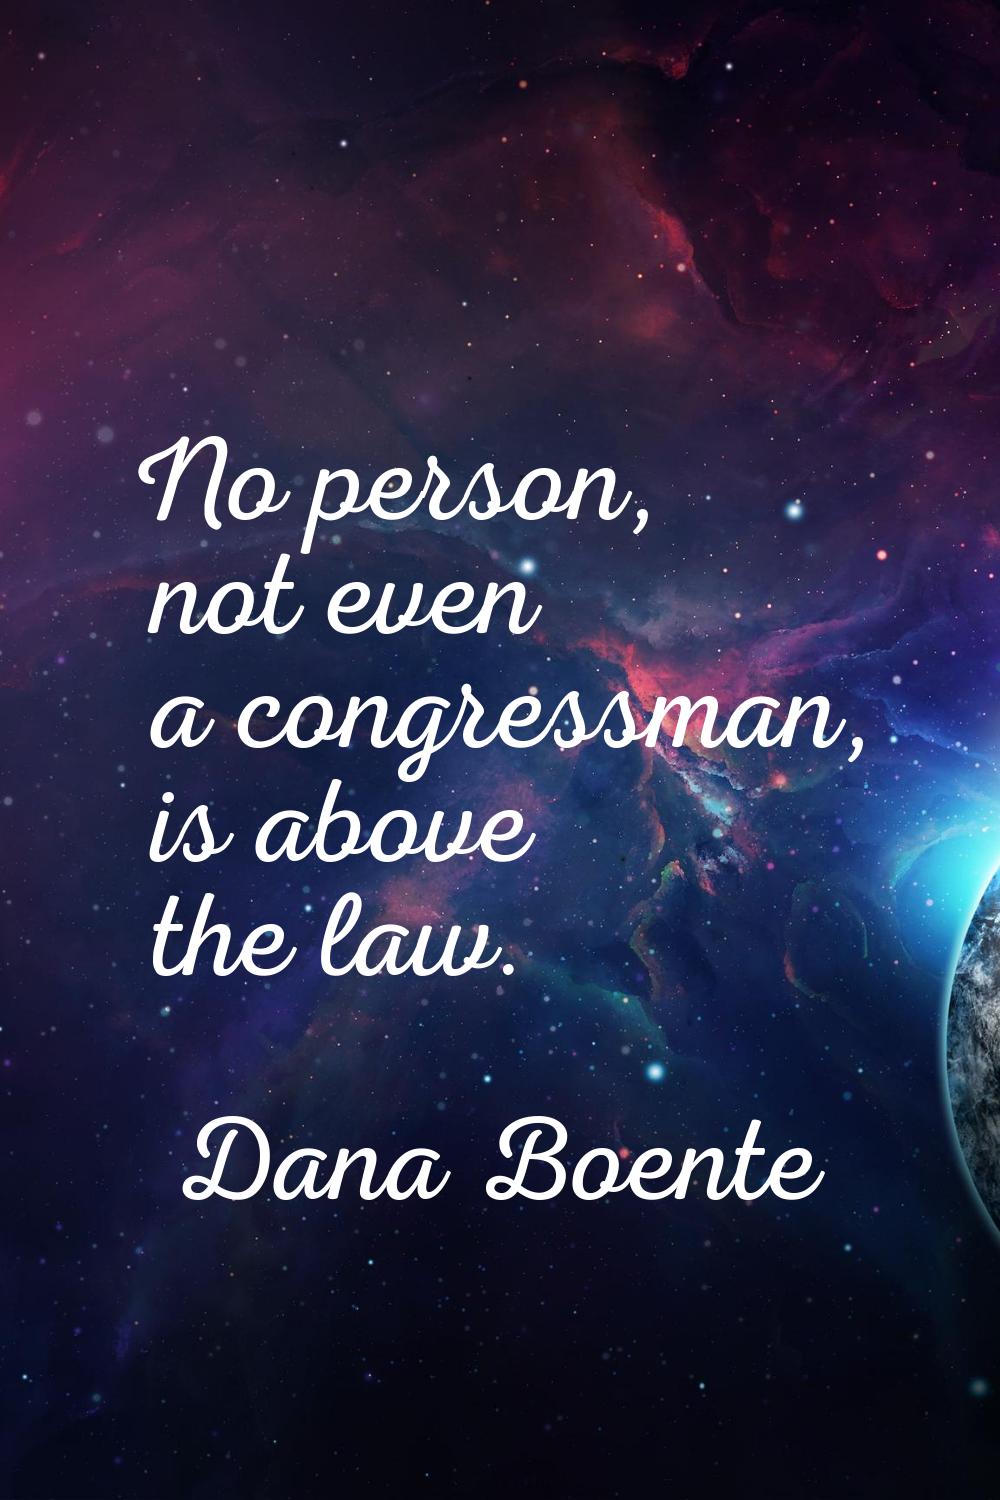 No person, not even a congressman, is above the law.